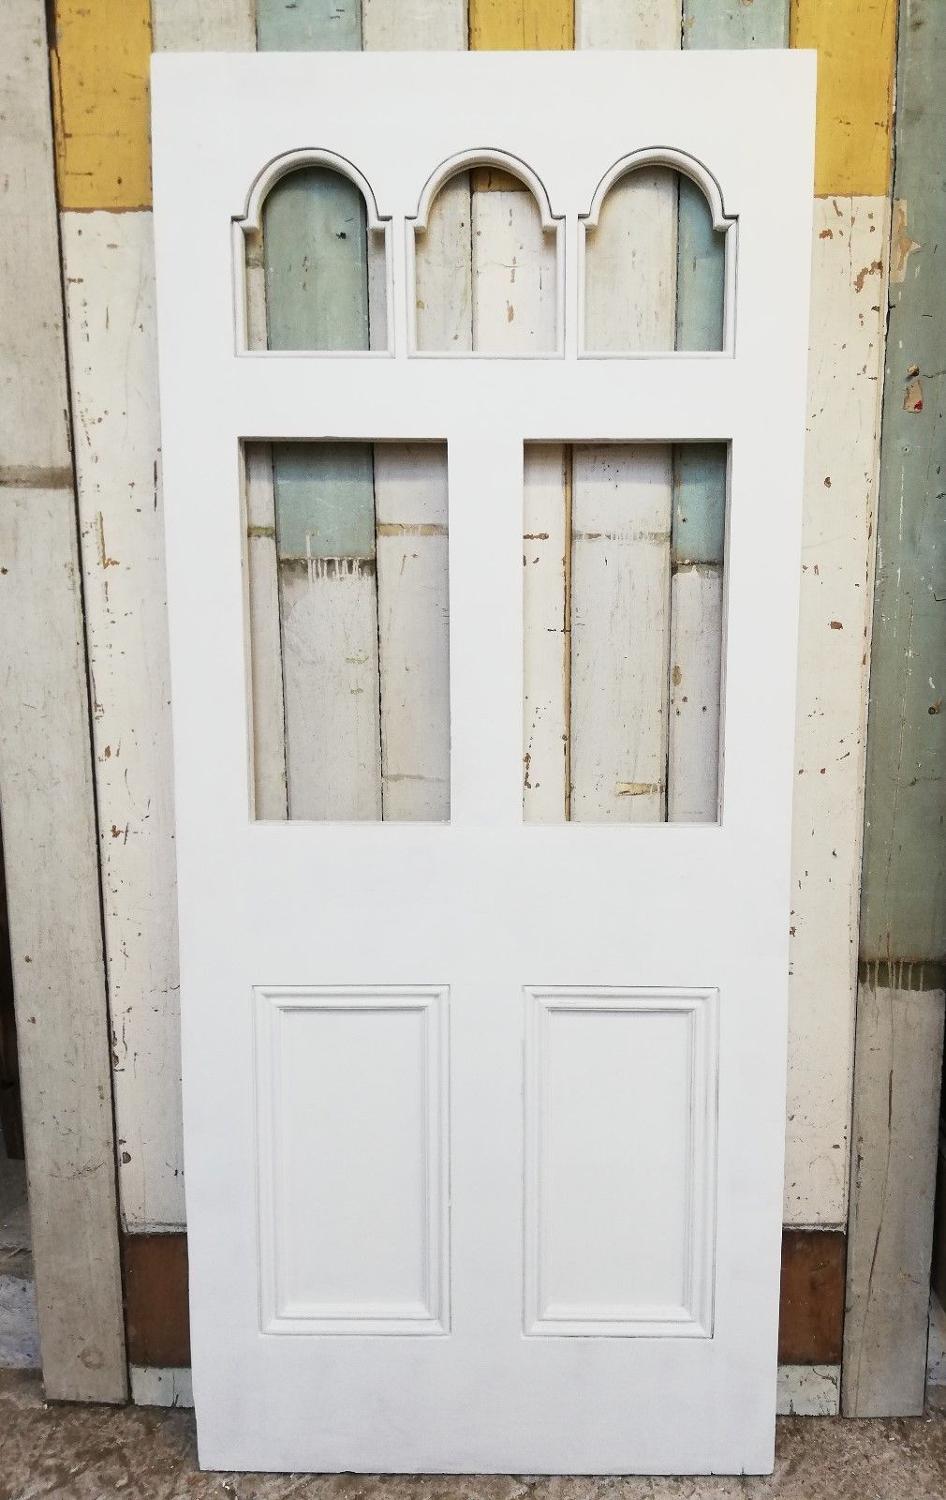 DE0774 A BEAUTIFUL VICTORIAN FRONT DOOR WITH ARCHED PANELS FOR GLAZING